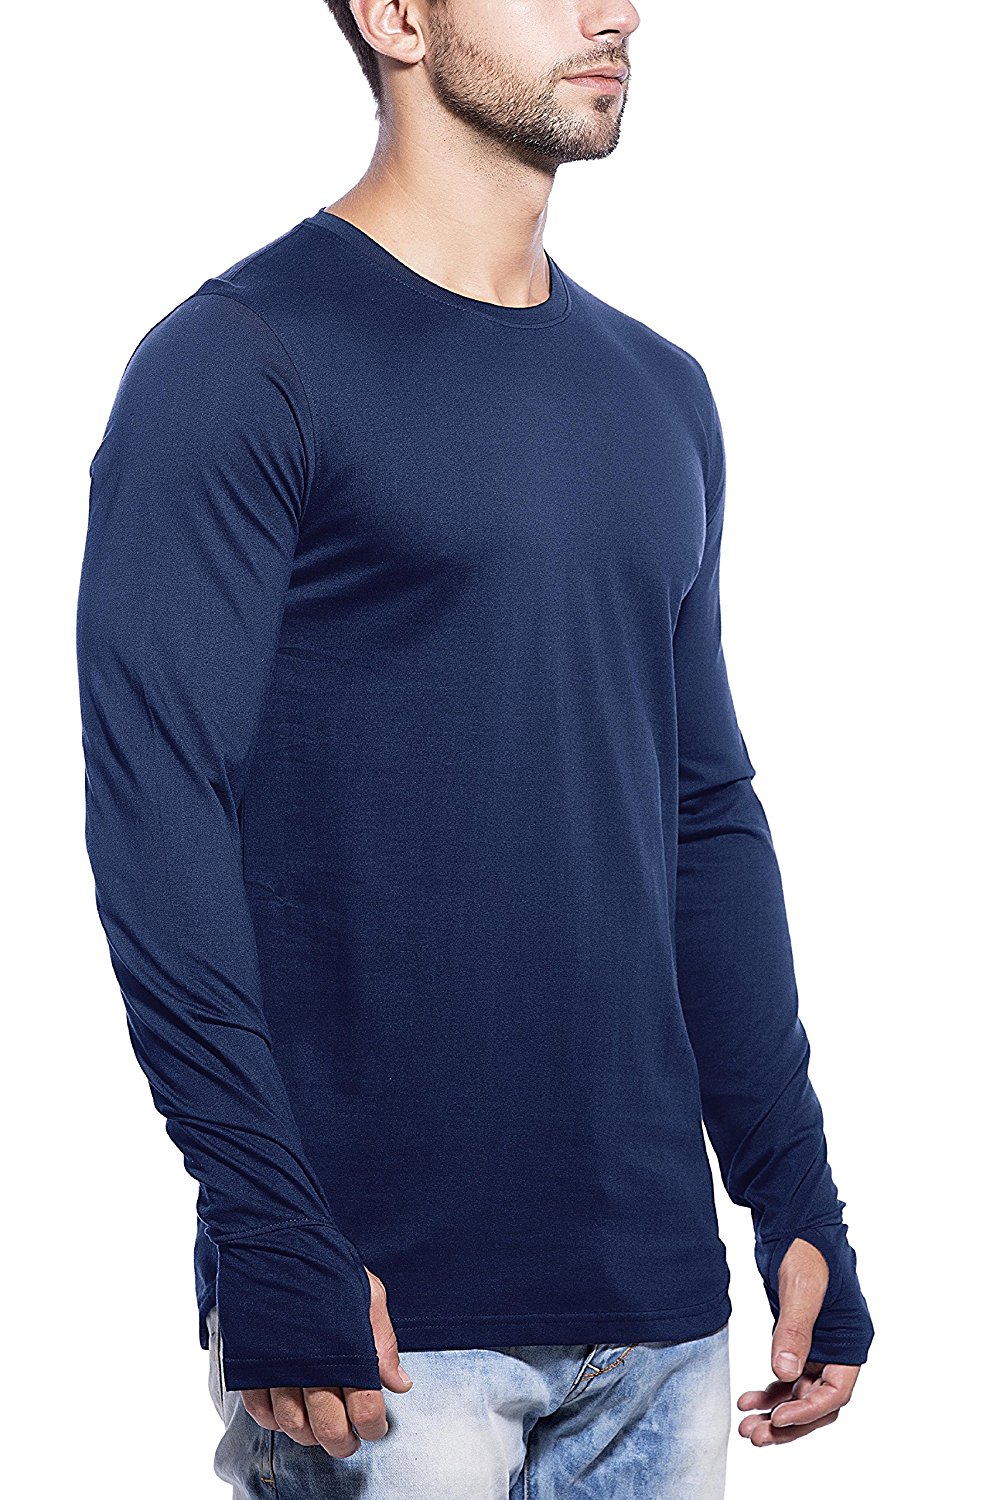 Buy PAUSE Thumbhole Solid Cotton Round Neck Slim Fit Long Sleeve Men's ...